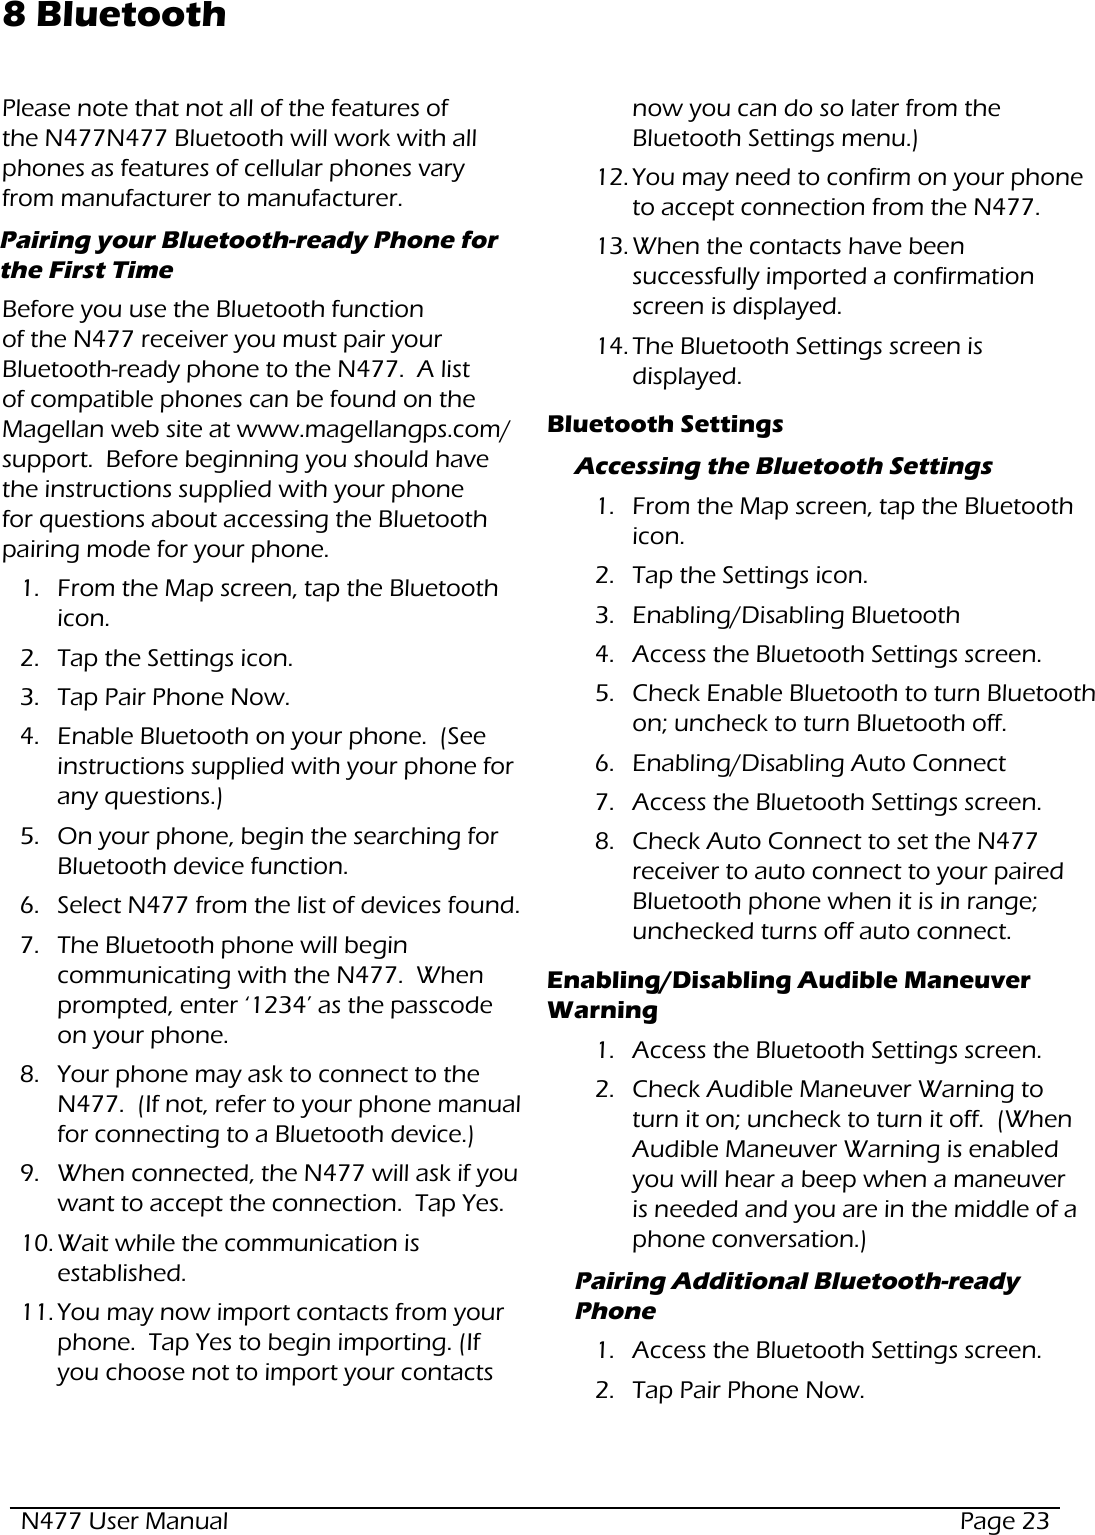 N477 User Manual  Page 238 BluetoothPlease note that not all of the features of the N477N477 Bluetooth will work with all phones as features of cellular phones vary from manufacturer to manufacturer.Pairing your Bluetooth-ready Phone for the First Time Before you use the Bluetooth function of the N477 receiver you must pair your Bluetooth-ready phone to the N477.  A list of compatible phones can be found on the Magellan web site at www.magellangps.com/support.  Before beginning you should have the instructions supplied with your phone for questions about accessing the Bluetooth pairing mode for your phone.1.  From the Map screen, tap the Bluetooth icon.2.  Tap the Settings icon.3.  Tap Pair Phone Now.4.  Enable Bluetooth on your phone.  (See instructions supplied with your phone for any questions.)5.  On your phone, begin the searching for Bluetooth device function.6.  Select N477 from the list of devices found.7.  The Bluetooth phone will begin communicating with the N477.  When prompted, enter ‘1234’ as the passcode on your phone.8.  Your phone may ask to connect to the N477.  (If not, refer to your phone manual for connecting to a Bluetooth device.)9.  When connected, the N477 will ask if you want to accept the connection.  Tap Yes.10. Wait while the communication is established.11. You may now import contacts from your phone.  Tap Yes to begin importing. (If you choose not to import your contacts now you can do so later from the Bluetooth Settings menu.)12. You may need to confirm on your phone to accept connection from the N477.13. When the contacts have been successfully imported a confirmation screen is displayed.  14. The Bluetooth Settings screen is displayed.Bluetooth SettingsAccessing the Bluetooth Settings1.  From the Map screen, tap the Bluetooth icon.2.  Tap the Settings icon.3.  Enabling/Disabling Bluetooth4.  Access the Bluetooth Settings screen.5.  Check Enable Bluetooth to turn Bluetooth on; uncheck to turn Bluetooth off.6.  Enabling/Disabling Auto Connect7.  Access the Bluetooth Settings screen.8.  Check Auto Connect to set the N477 receiver to auto connect to your paired Bluetooth phone when it is in range; unchecked turns off auto connect.Enabling/Disabling Audible Maneuver Warning1.  Access the Bluetooth Settings screen.2.  Check Audible Maneuver Warning to turn it on; uncheck to turn it off.  (When Audible Maneuver Warning is enabled you will hear a beep when a maneuver is needed and you are in the middle of a phone conversation.)Pairing Additional Bluetooth-ready Phone1.  Access the Bluetooth Settings screen.2.  Tap Pair Phone Now.